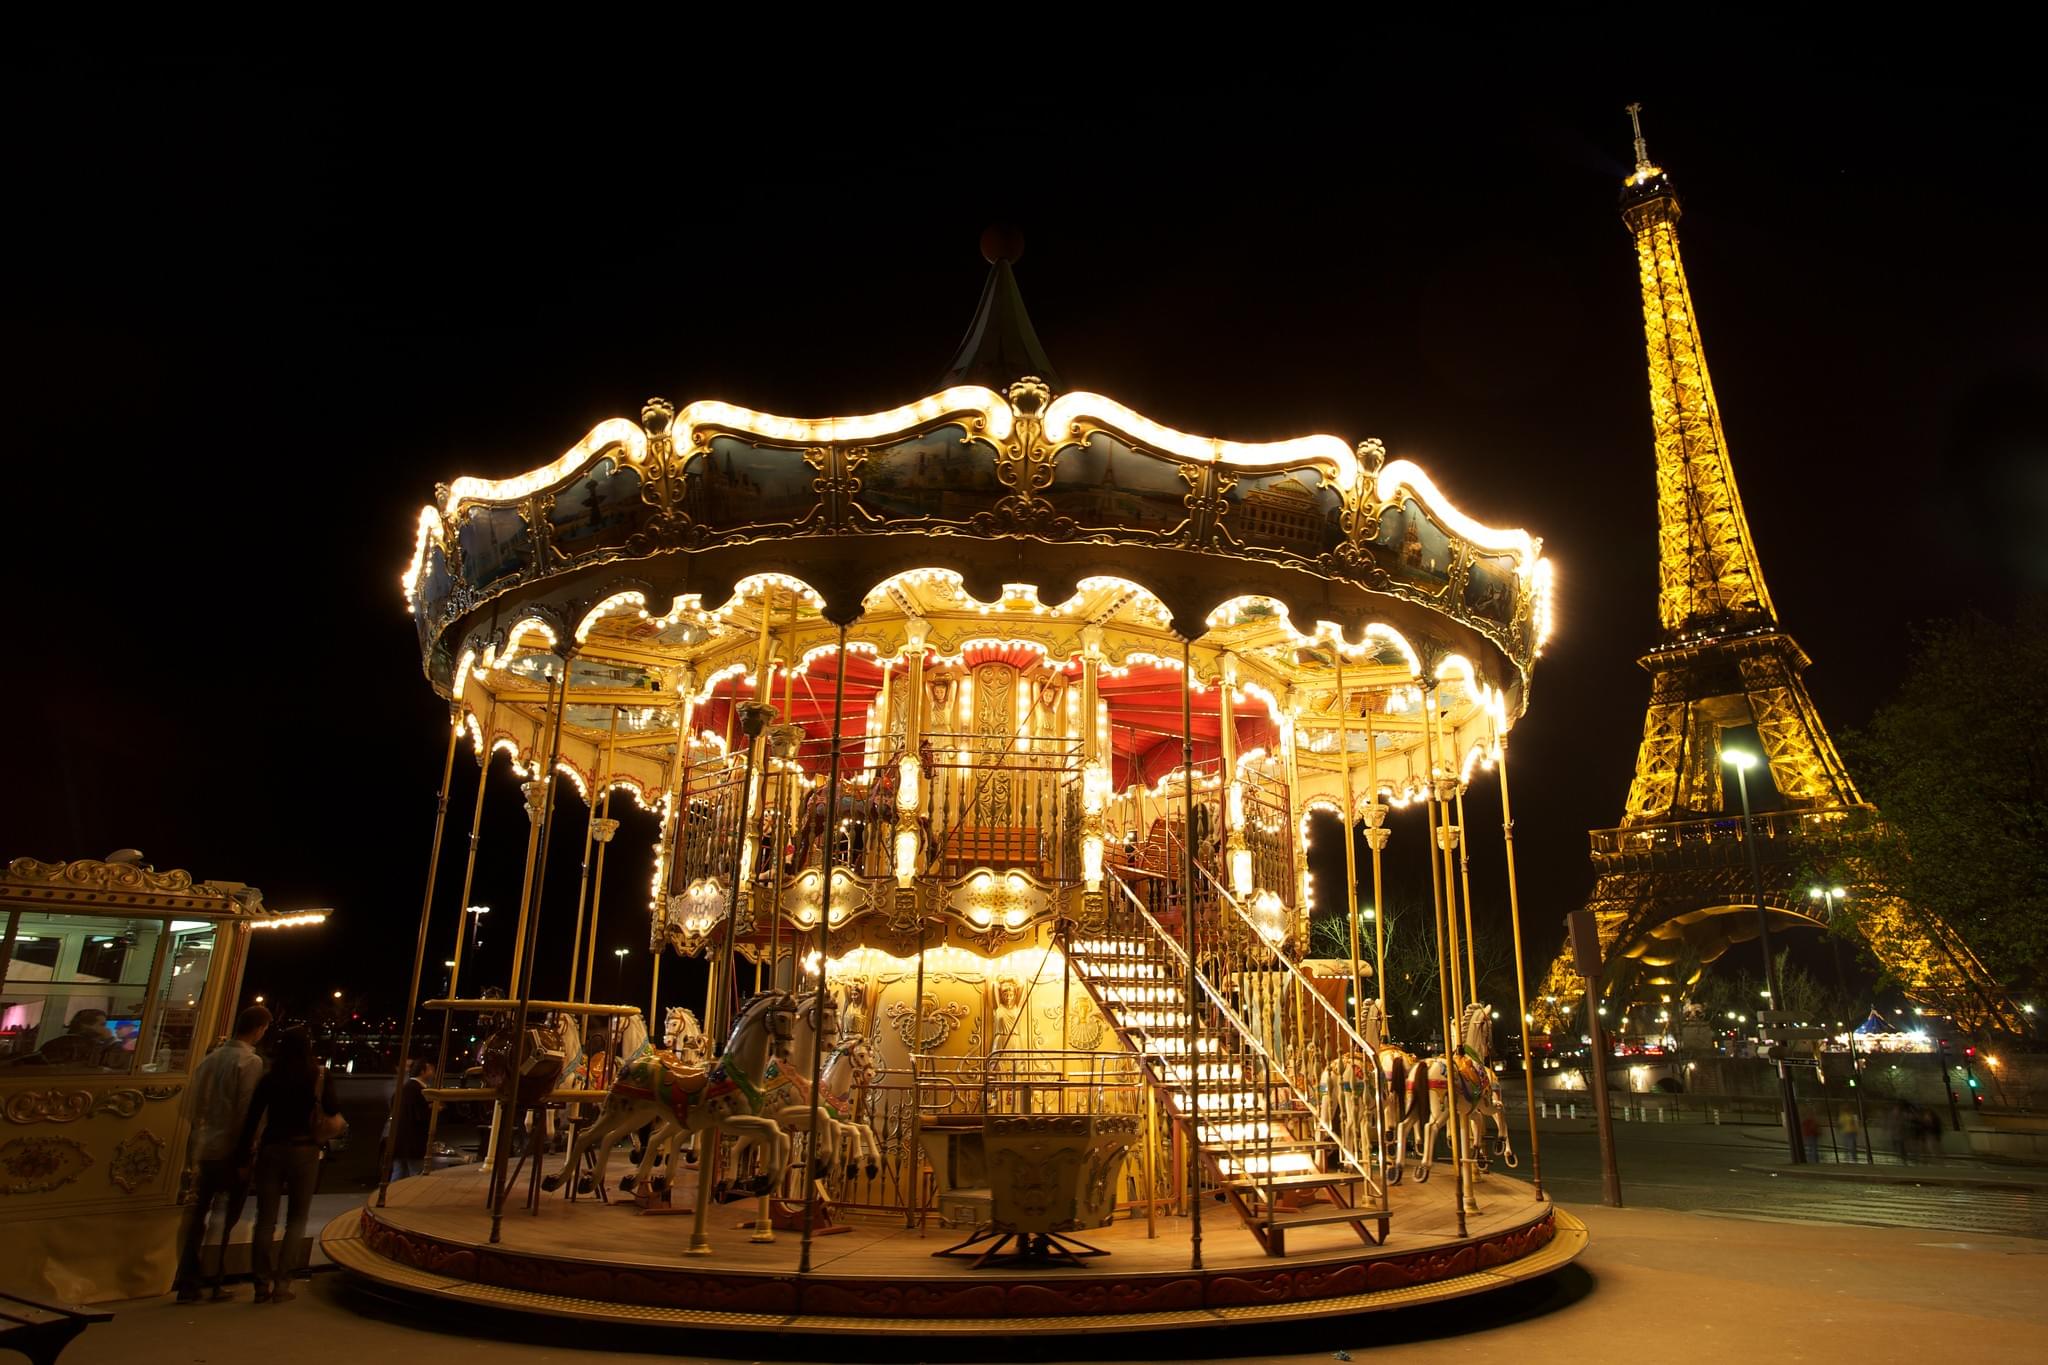 Carousel of the Eiffel Tower